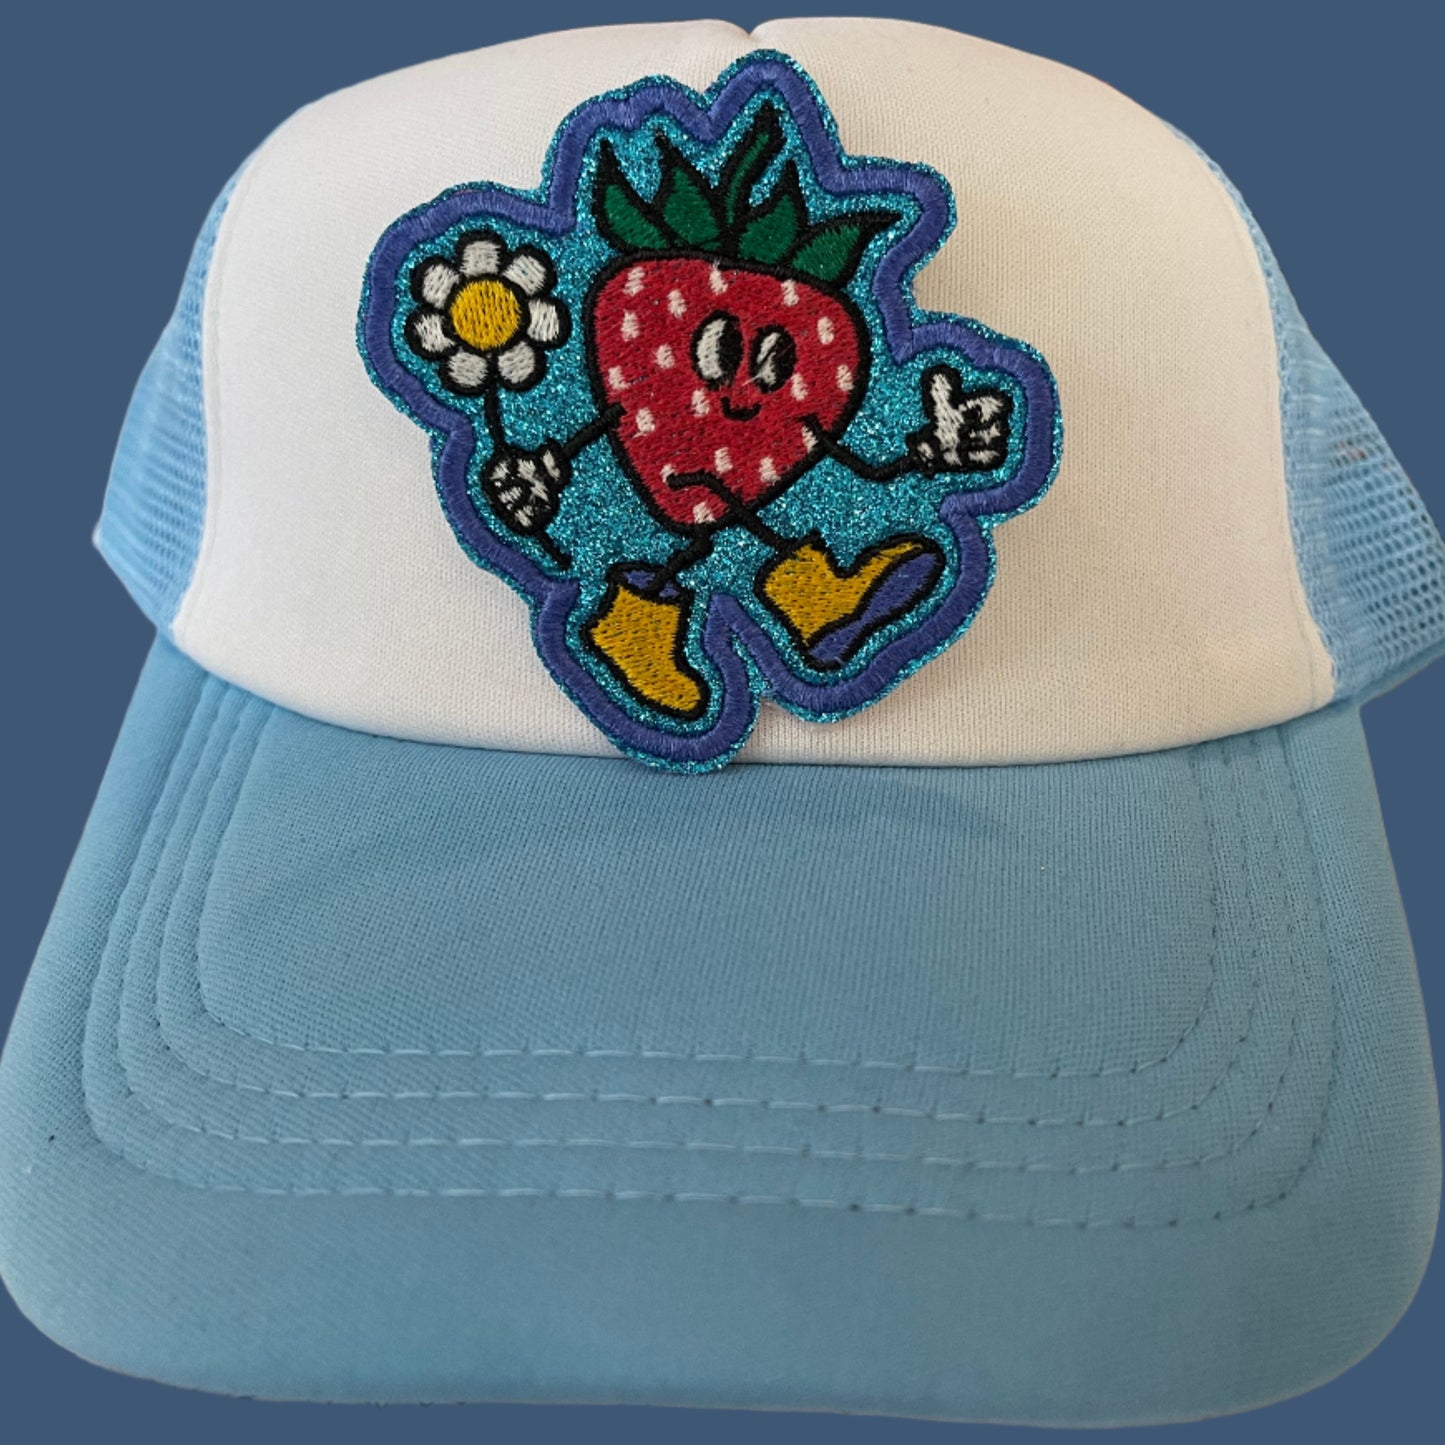 Handmade Strawberry in Galoshes Iron-On Patch | Red, Yellow, White Daisy, Blue Glitter Background